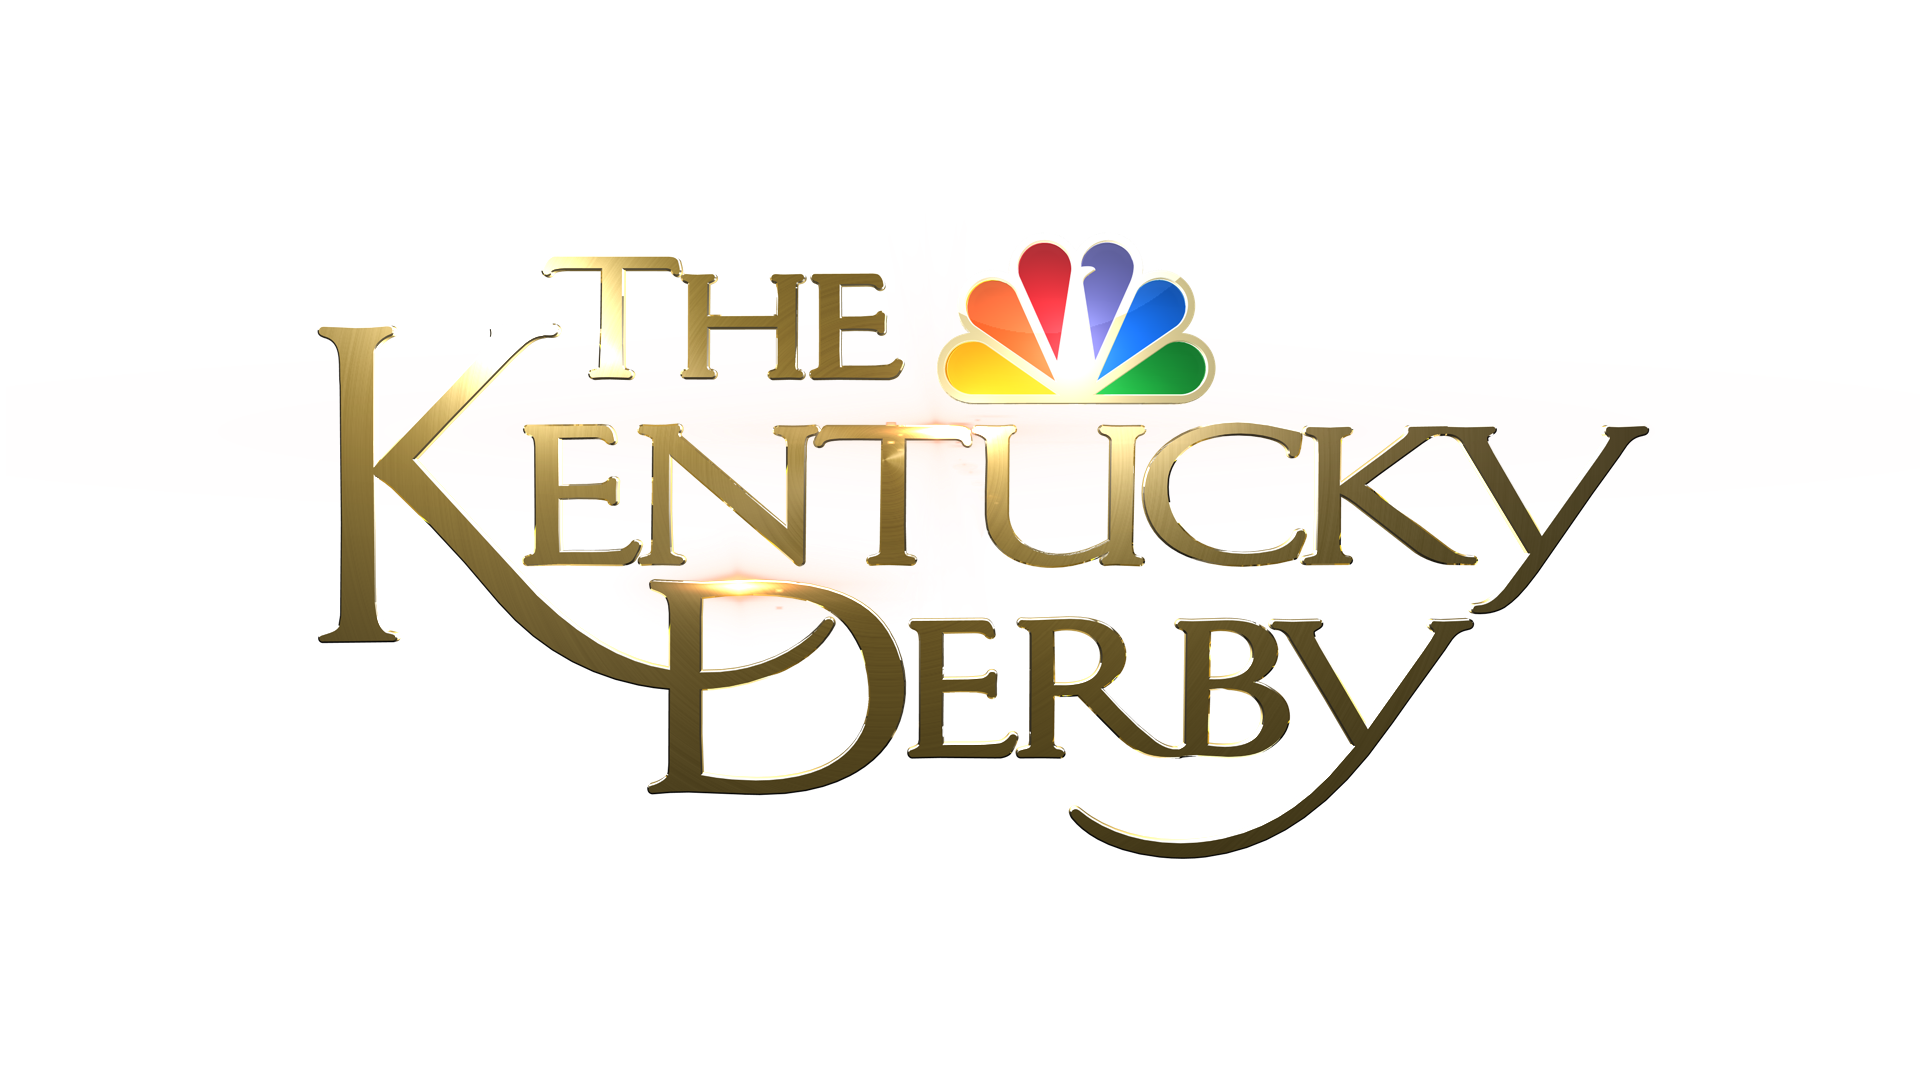 ratings-roundup-nbc-s-kentucky-derby-down-slightly-but-still-tops-15m